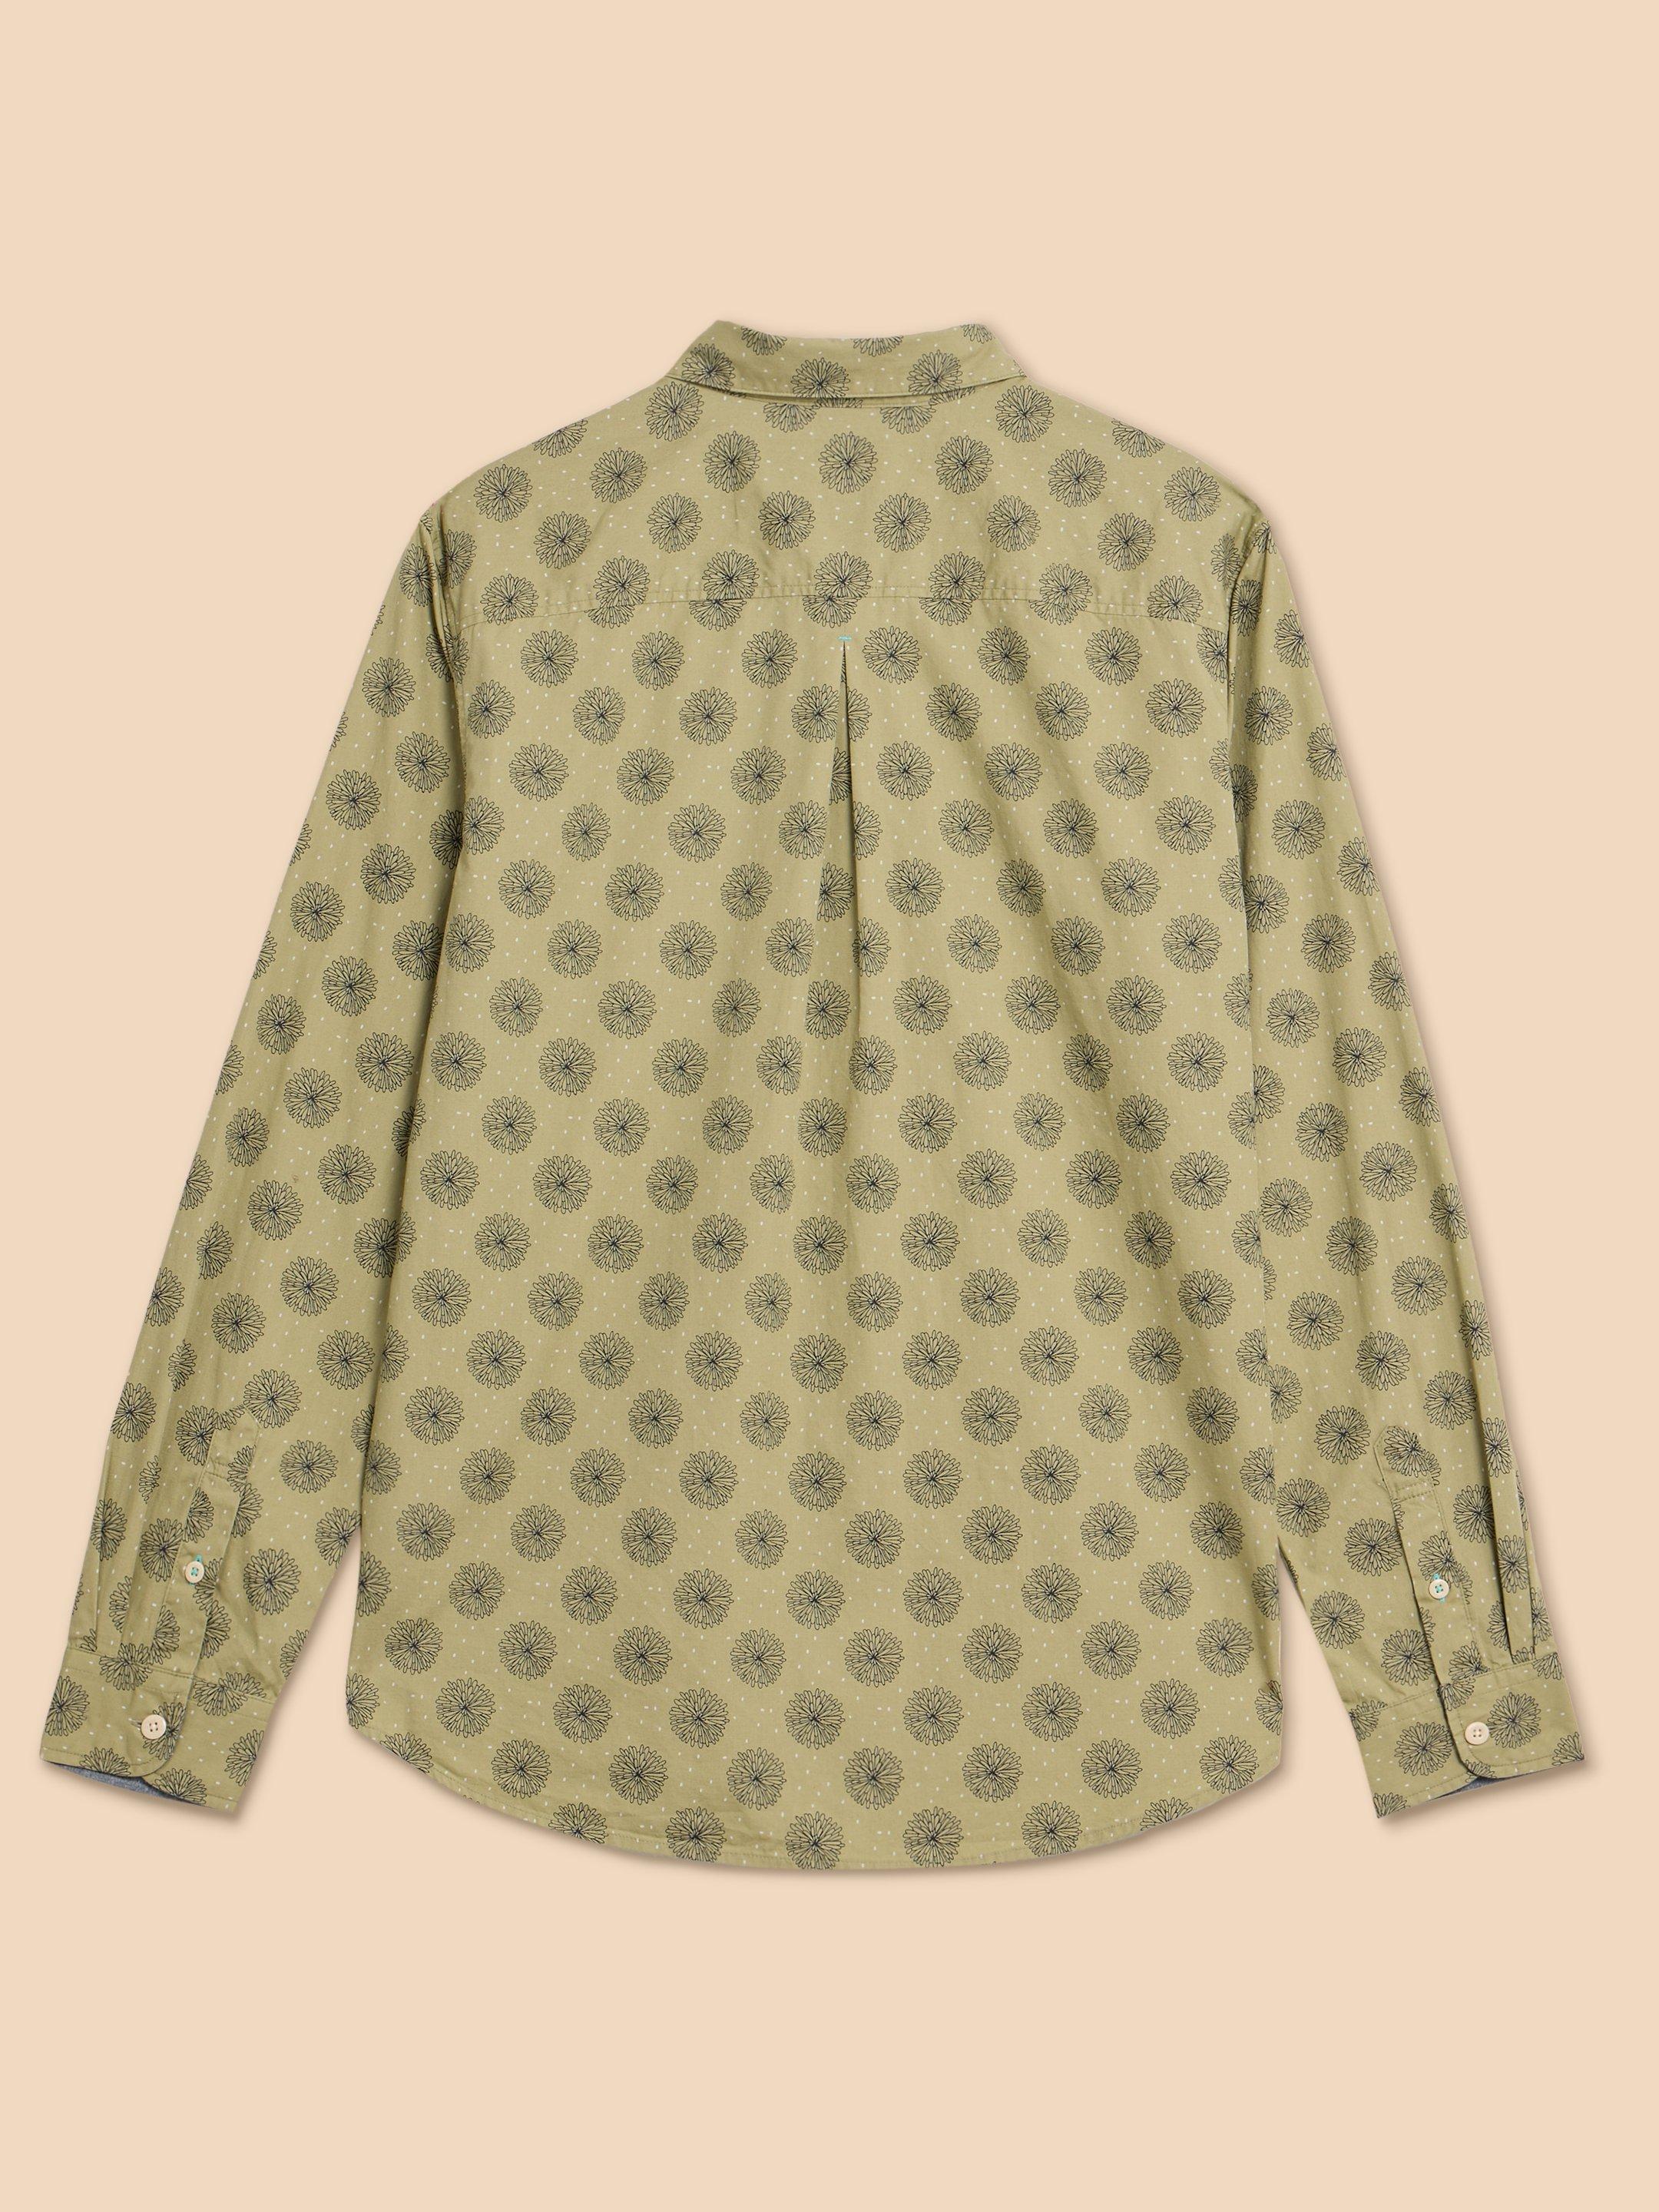 Daisy Floral Printed Shirt in GREEN PR - FLAT BACK